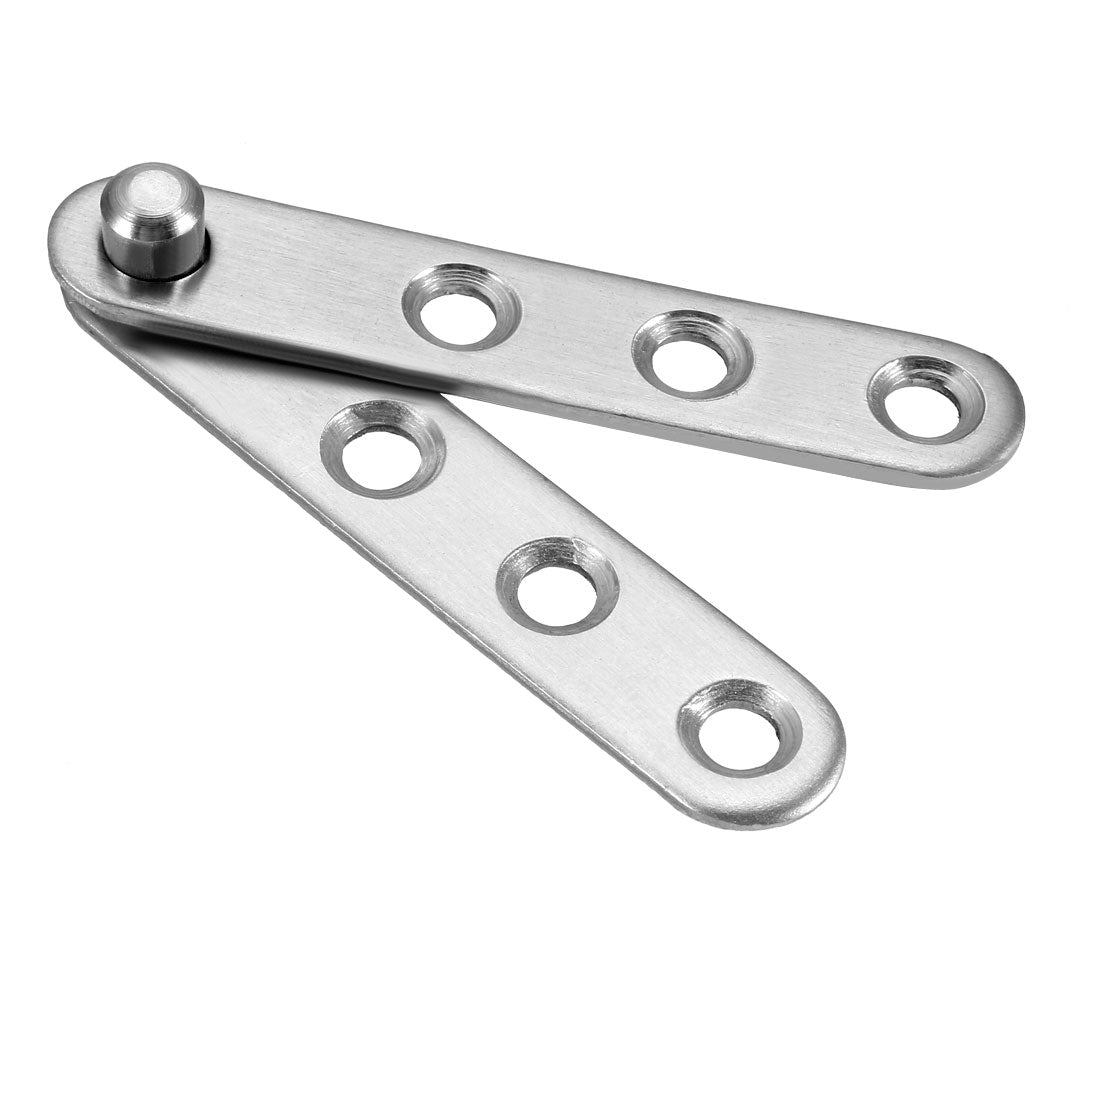 uxcell Uxcell Door Pivot Hinge, 58mmx11mmx9mm Stainless Steel 360 Degree Rotating 10pcs